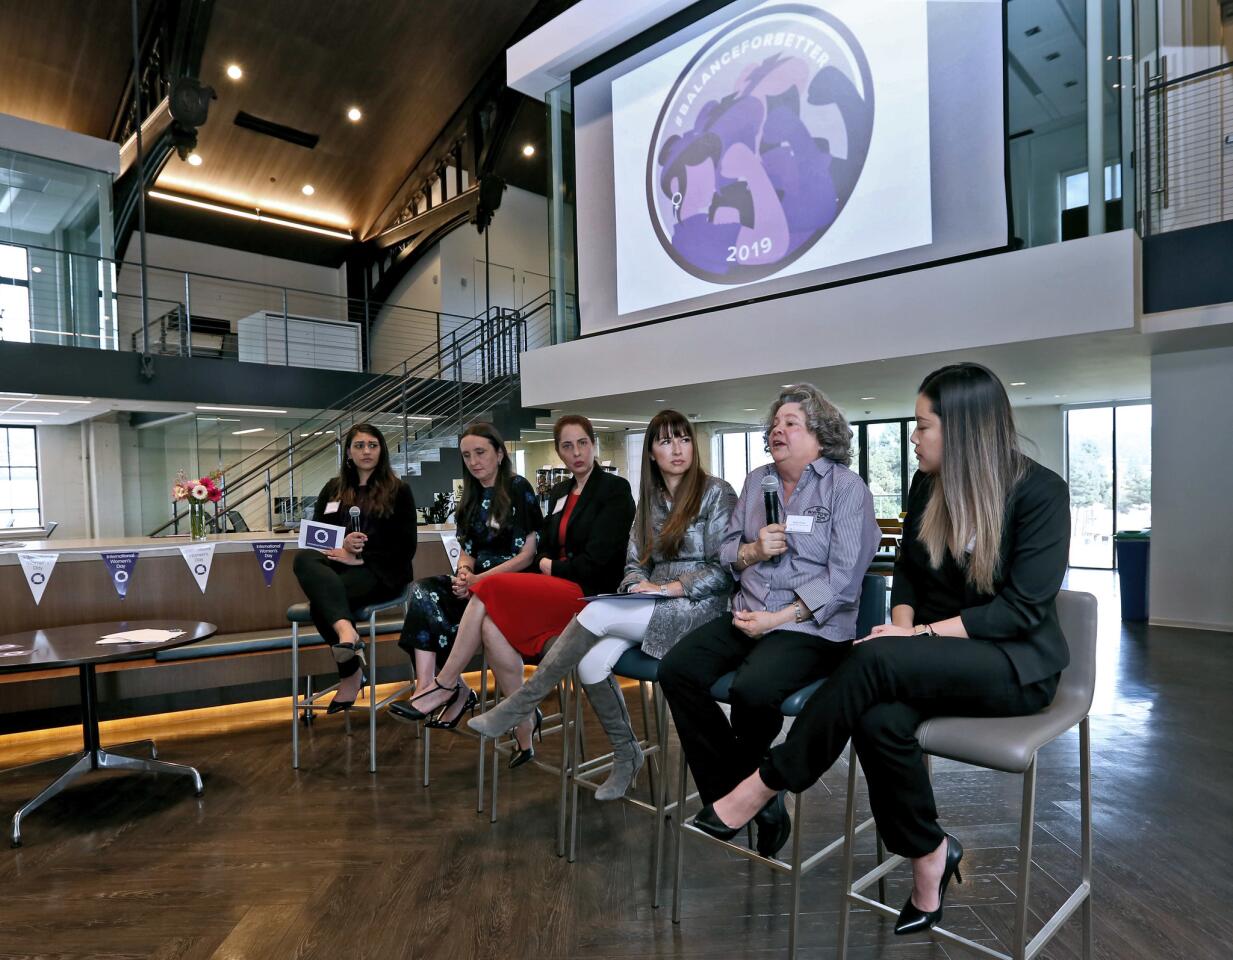 Betty Porto, owner of Porto's Bakery & Cafe, second from right, was one of the panelists at the first annual Celebration of International WomenÕs Day, at CBRE in Glendale on Friday, March 8, 2019. From left, moderator Nicole Dedic, Sales Manager at CBRE, Helen McDonagh, Owner of Massage Envy, Elissa Glickman, CEO of Glendale Arts, Miriam Lewis, Senior Vice President at Age of Learning, Betty Porto, Owner of Porto's Bakery & Cafe and Samantha Luu, Employment Branding Specialist at Service Titan.